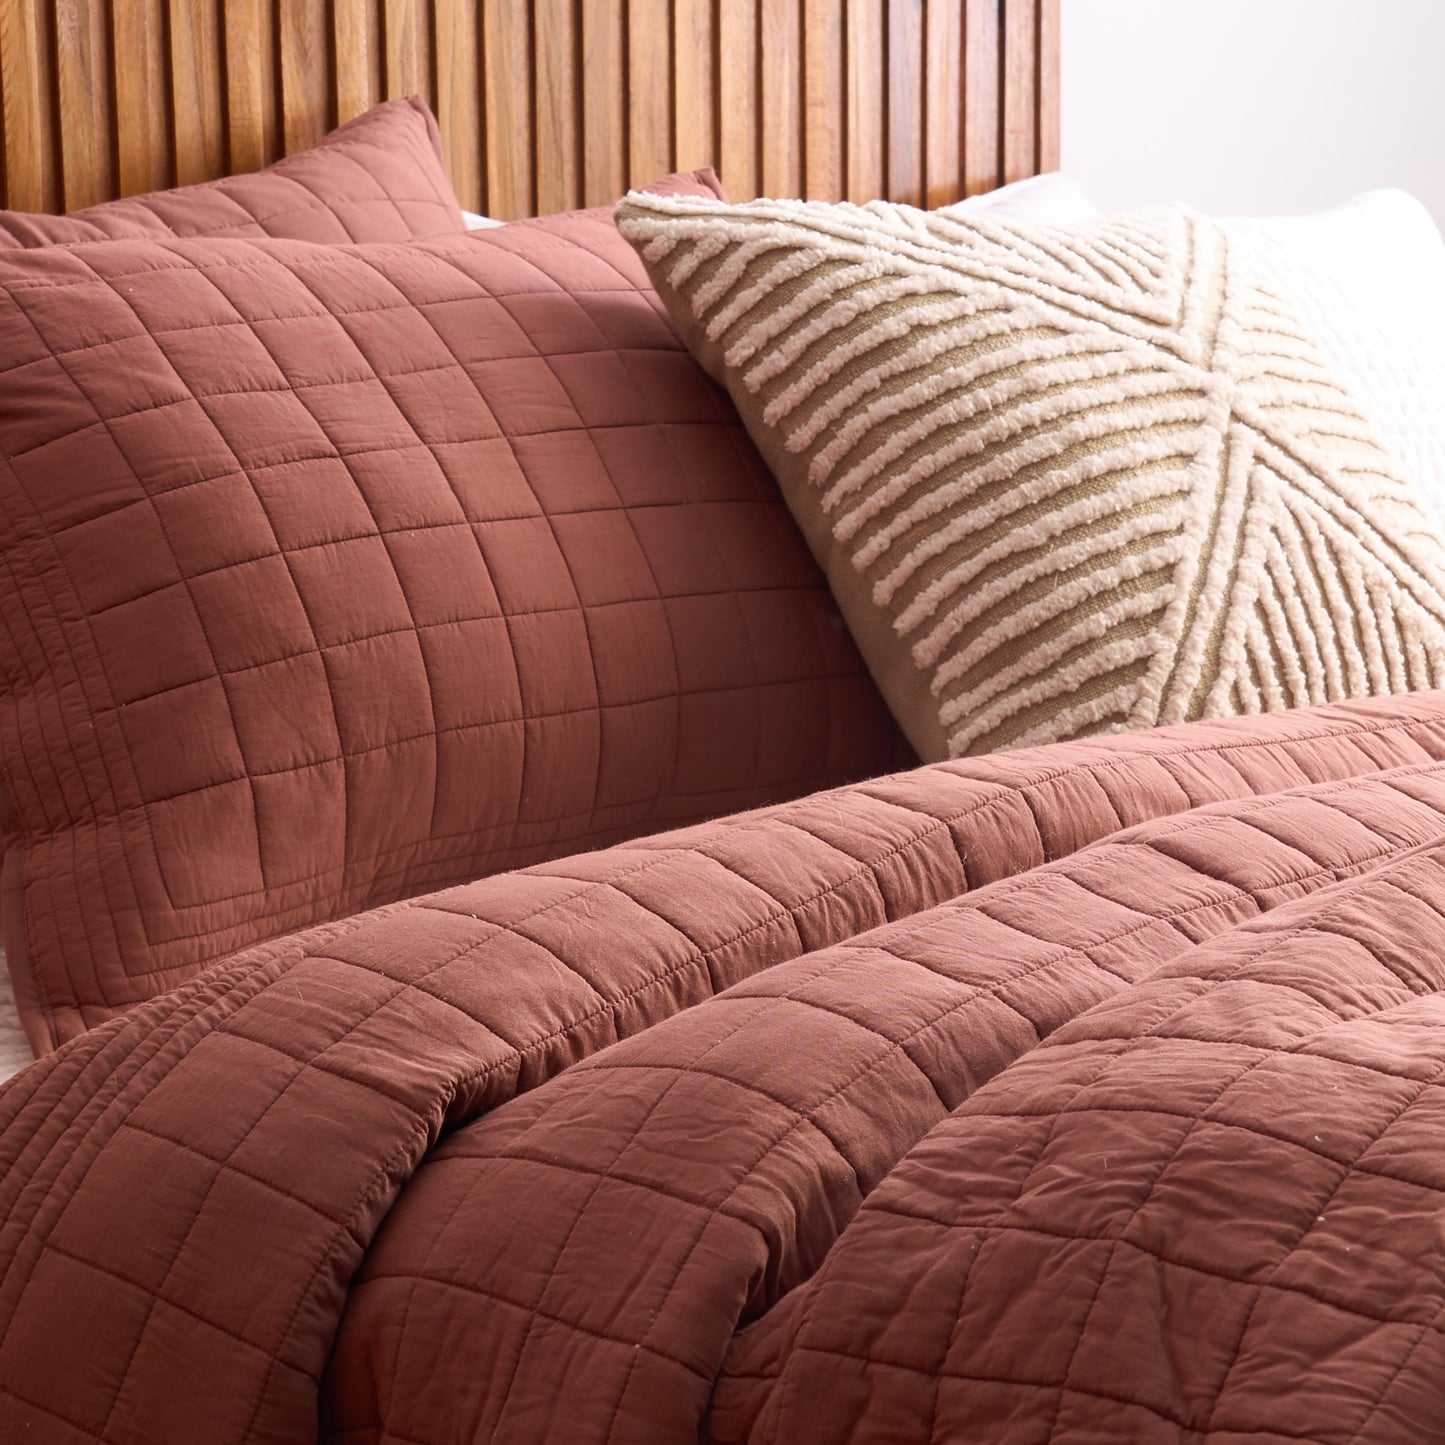 CLAY BROWN cotton Quilted - sets, quilts and pillow cases, Sizes available